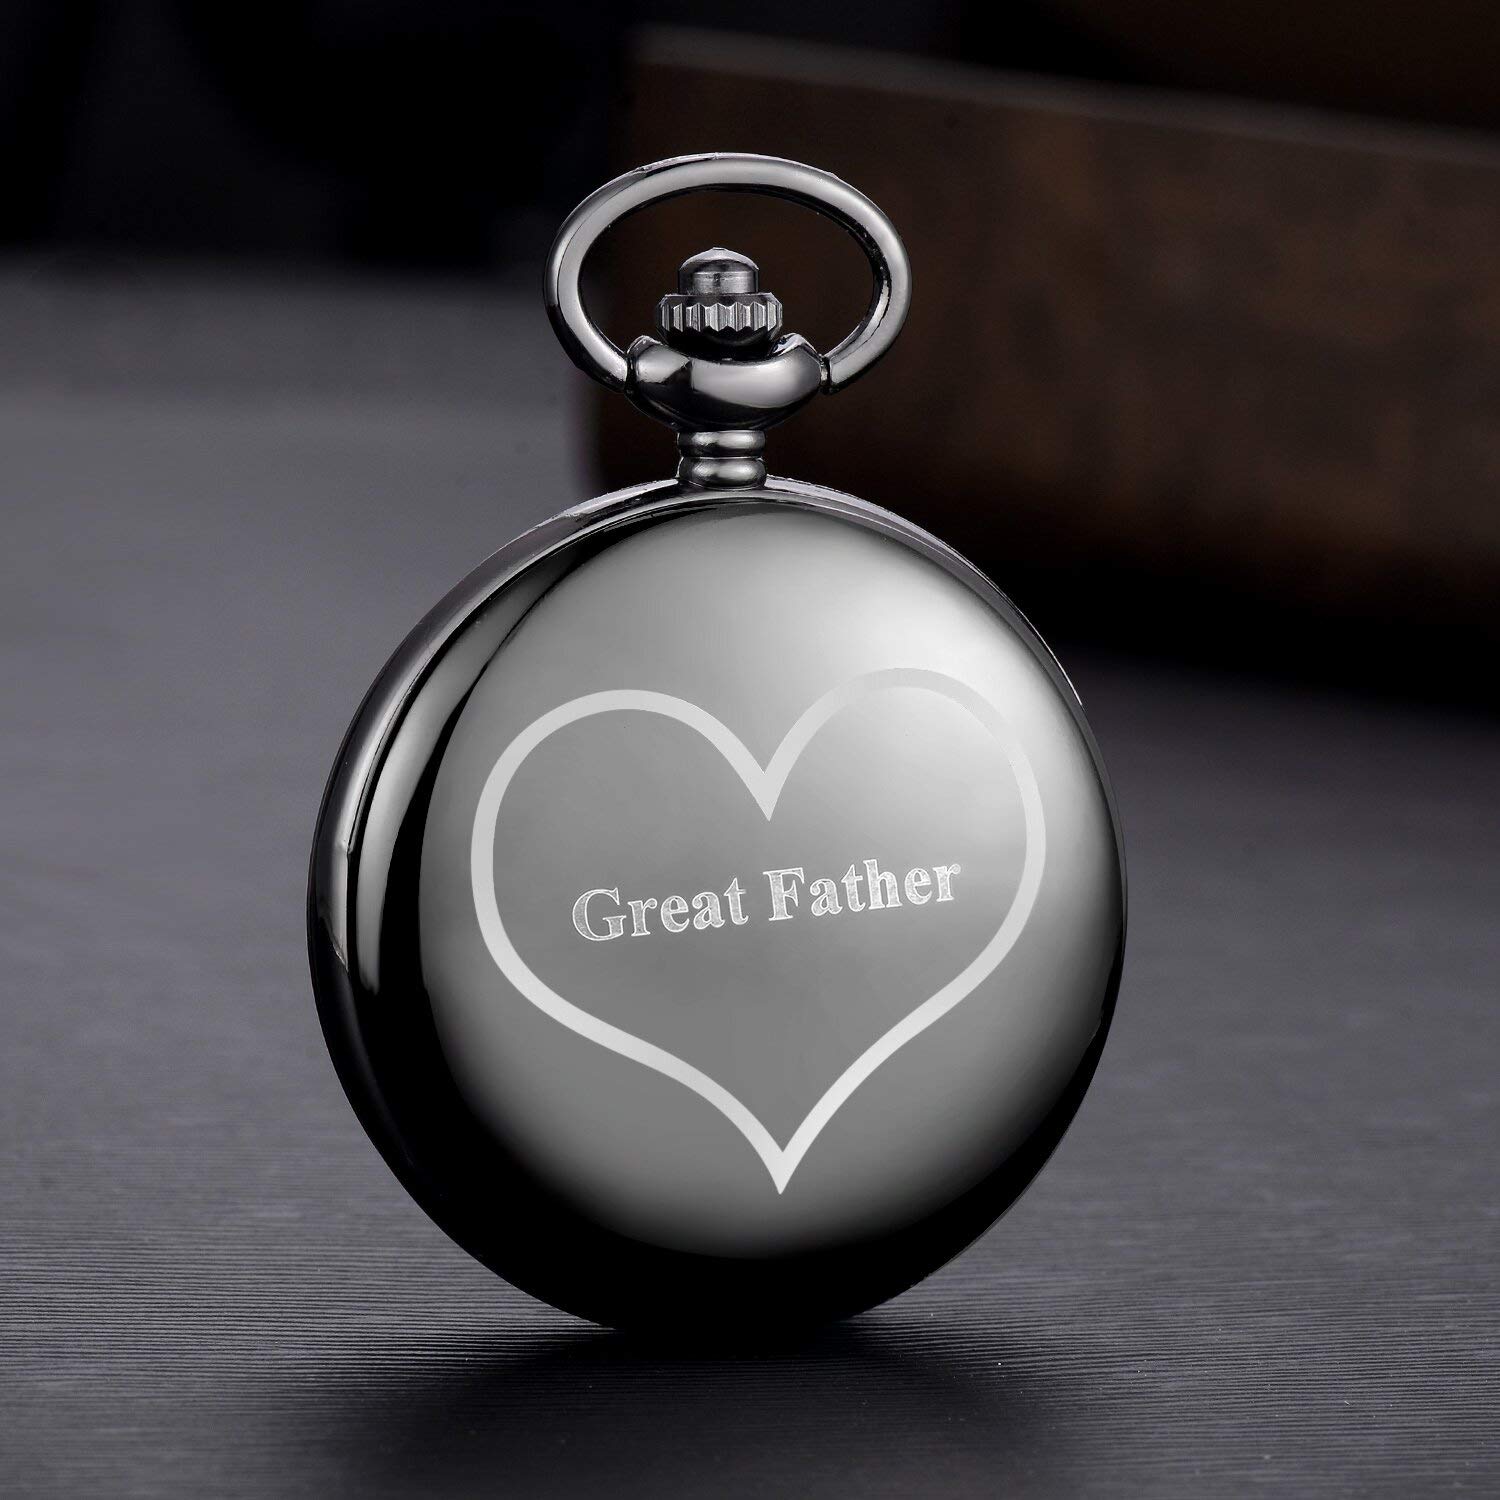 LYMFHCH Personalized Pocket Watch with Chain, Engraved “to My Dad” “I Love You” Used for Fathers Day Birthday Christmas Gifts Pocket Watches